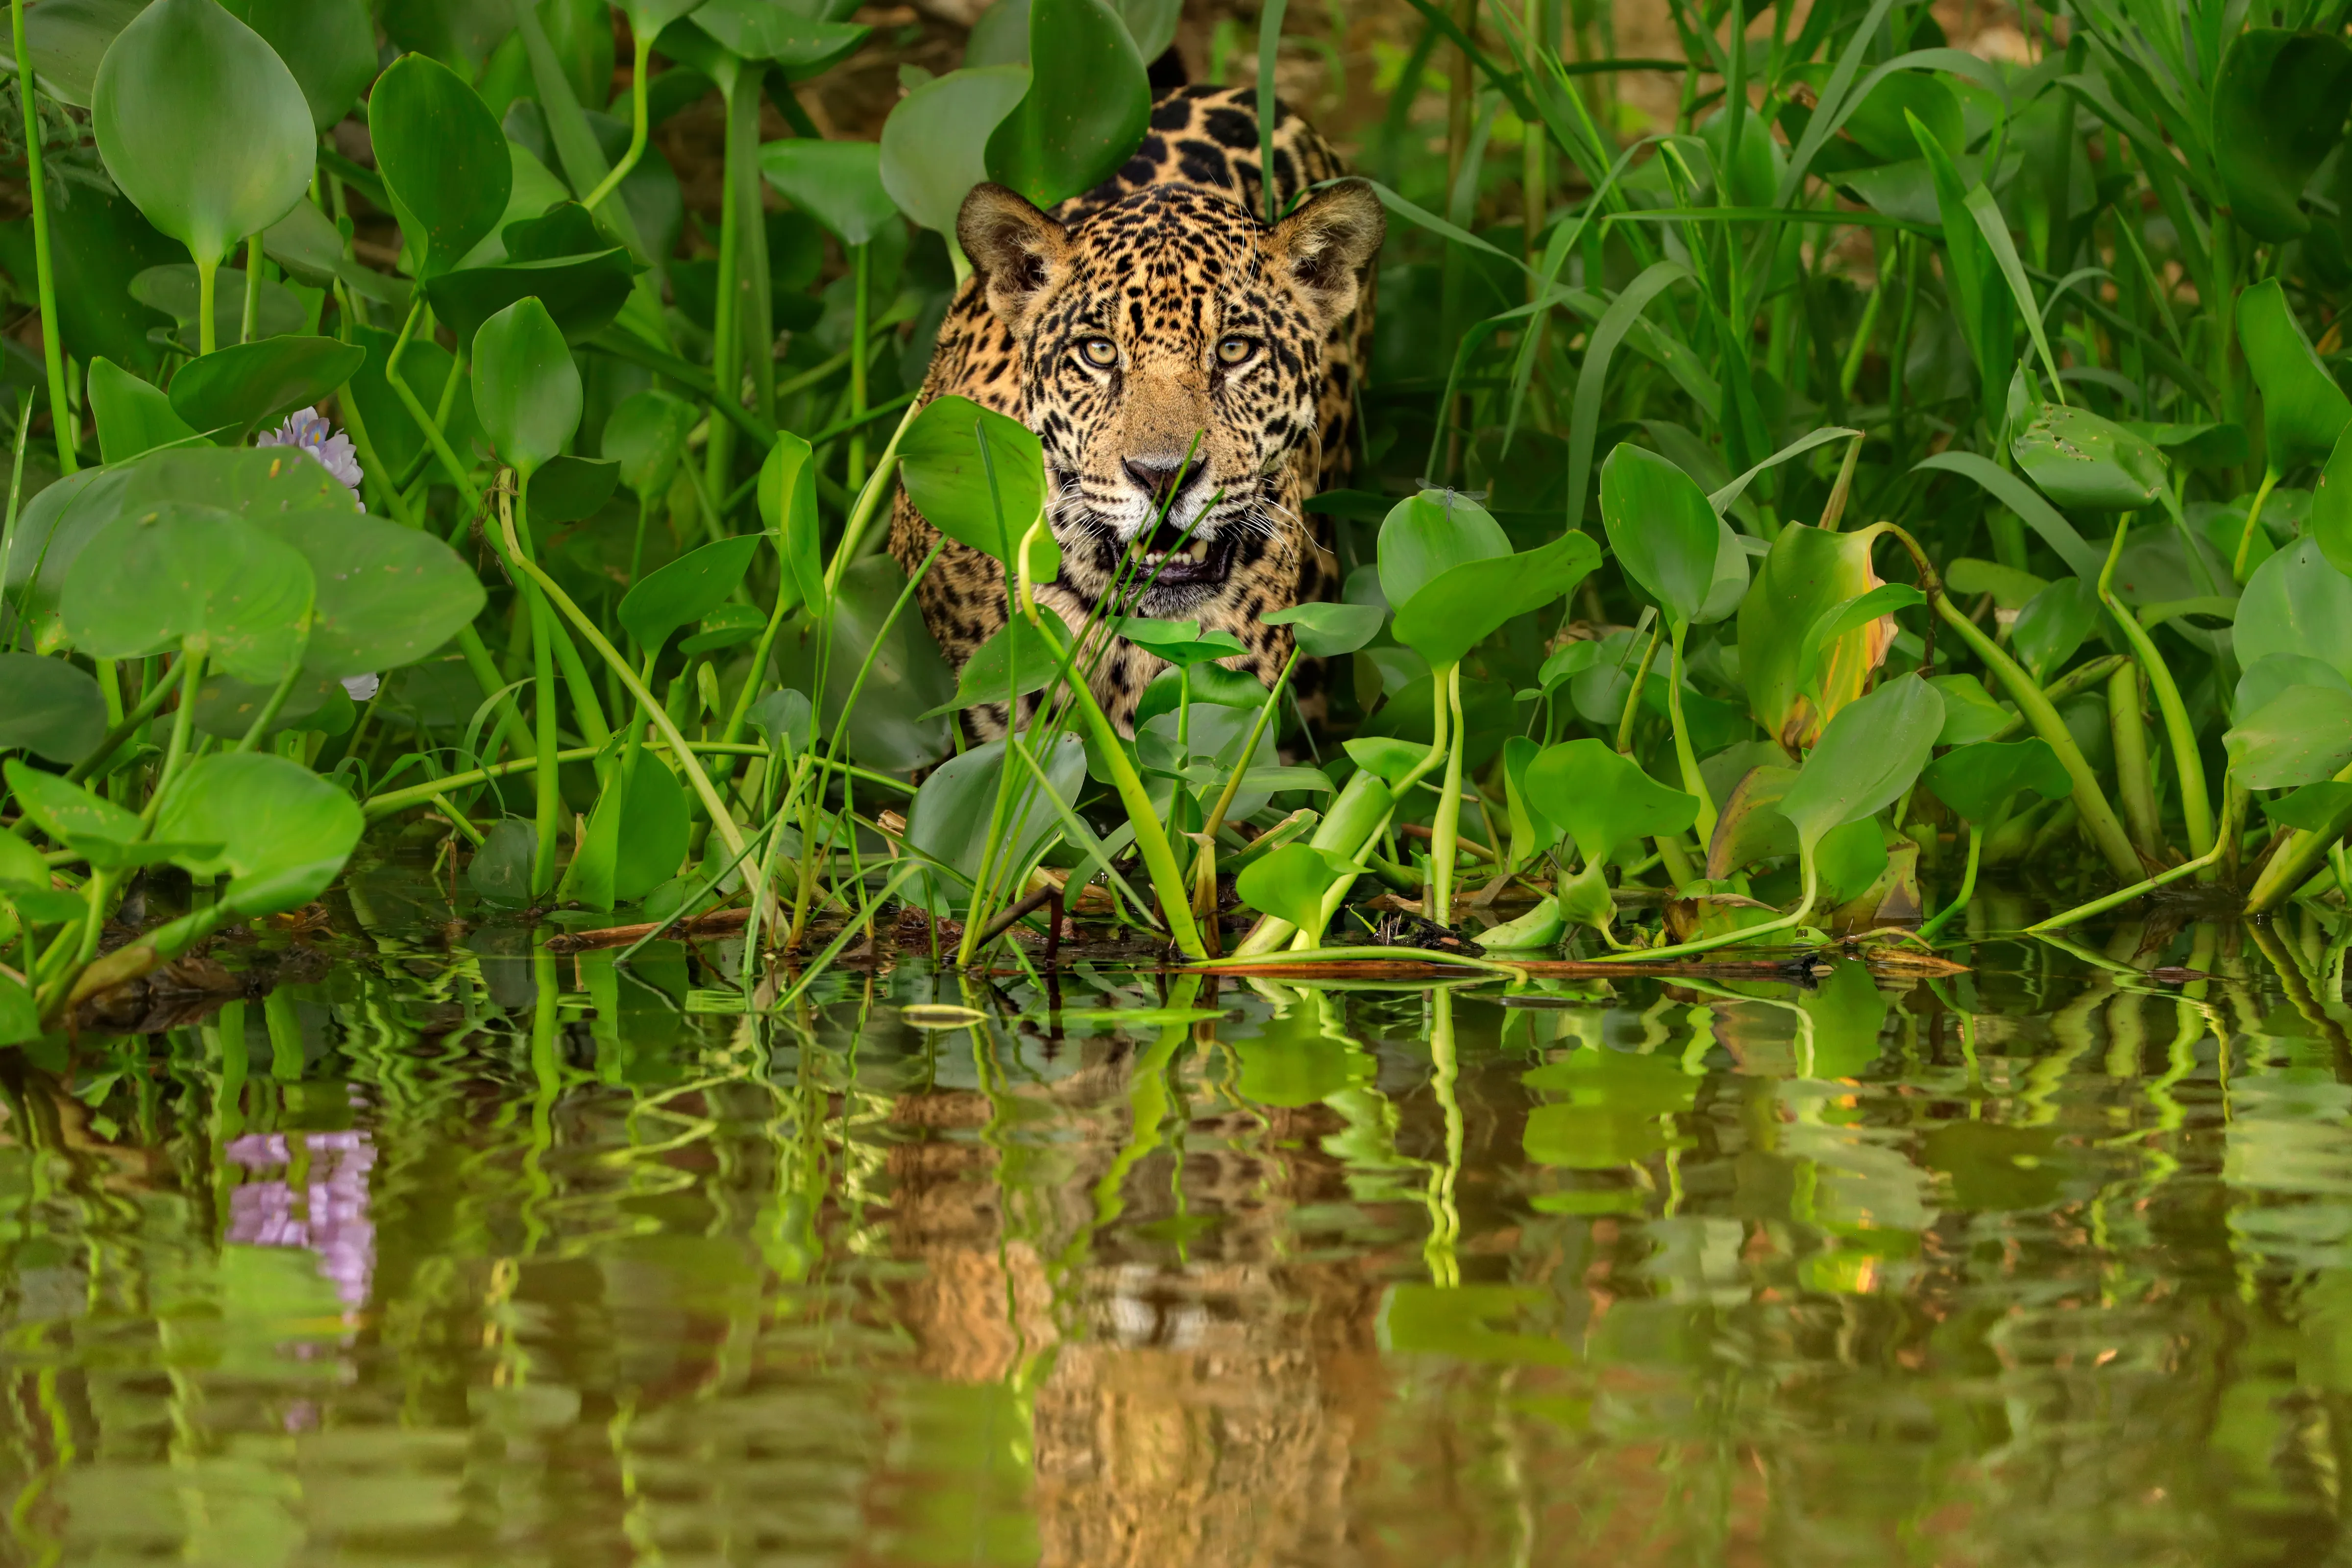 A jaguar peering at the camera from behind green plants and leaves.